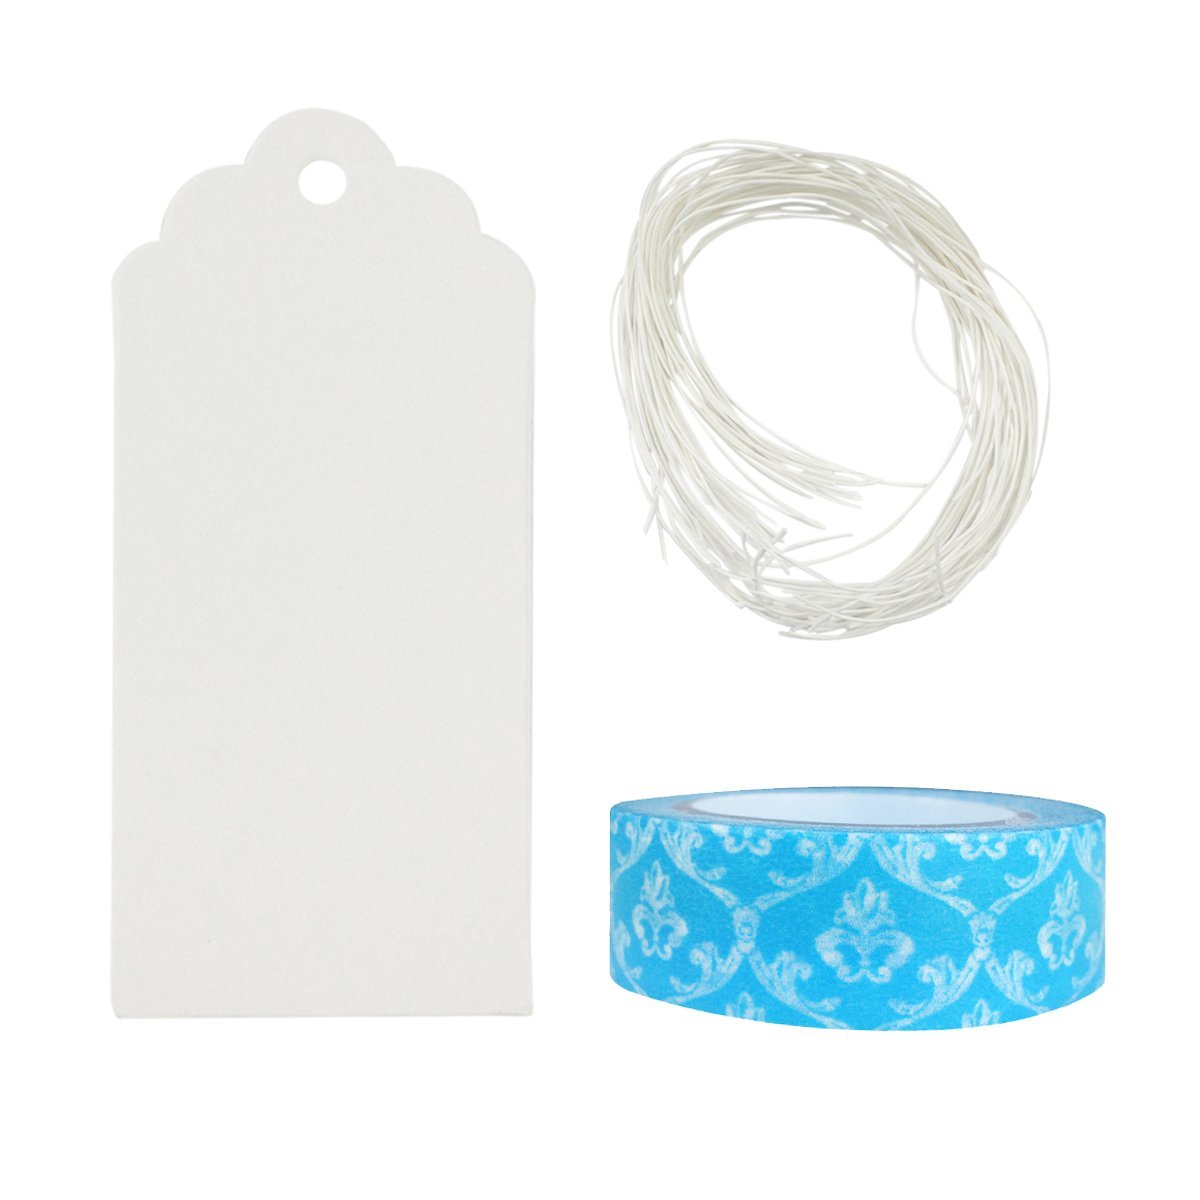 Wrapables 50 White Scallop Gift Tags with Free Cut String & 1 Washi Roll